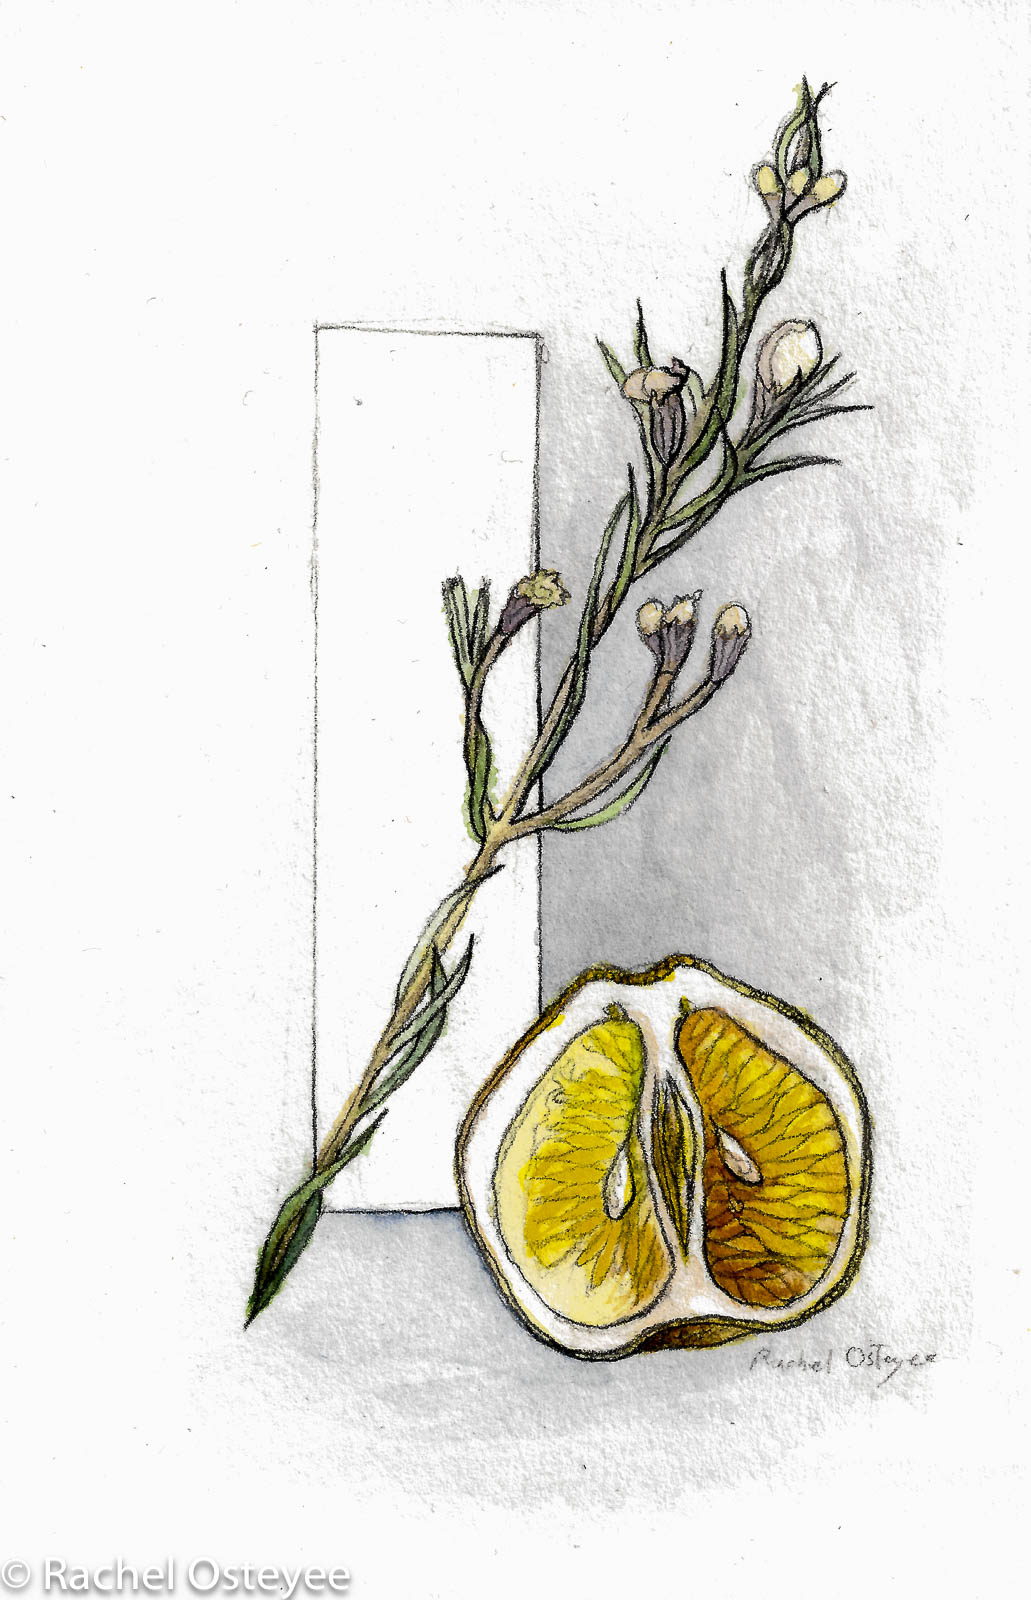 Rosemary and Citrus (4" x 6", Watercolor)